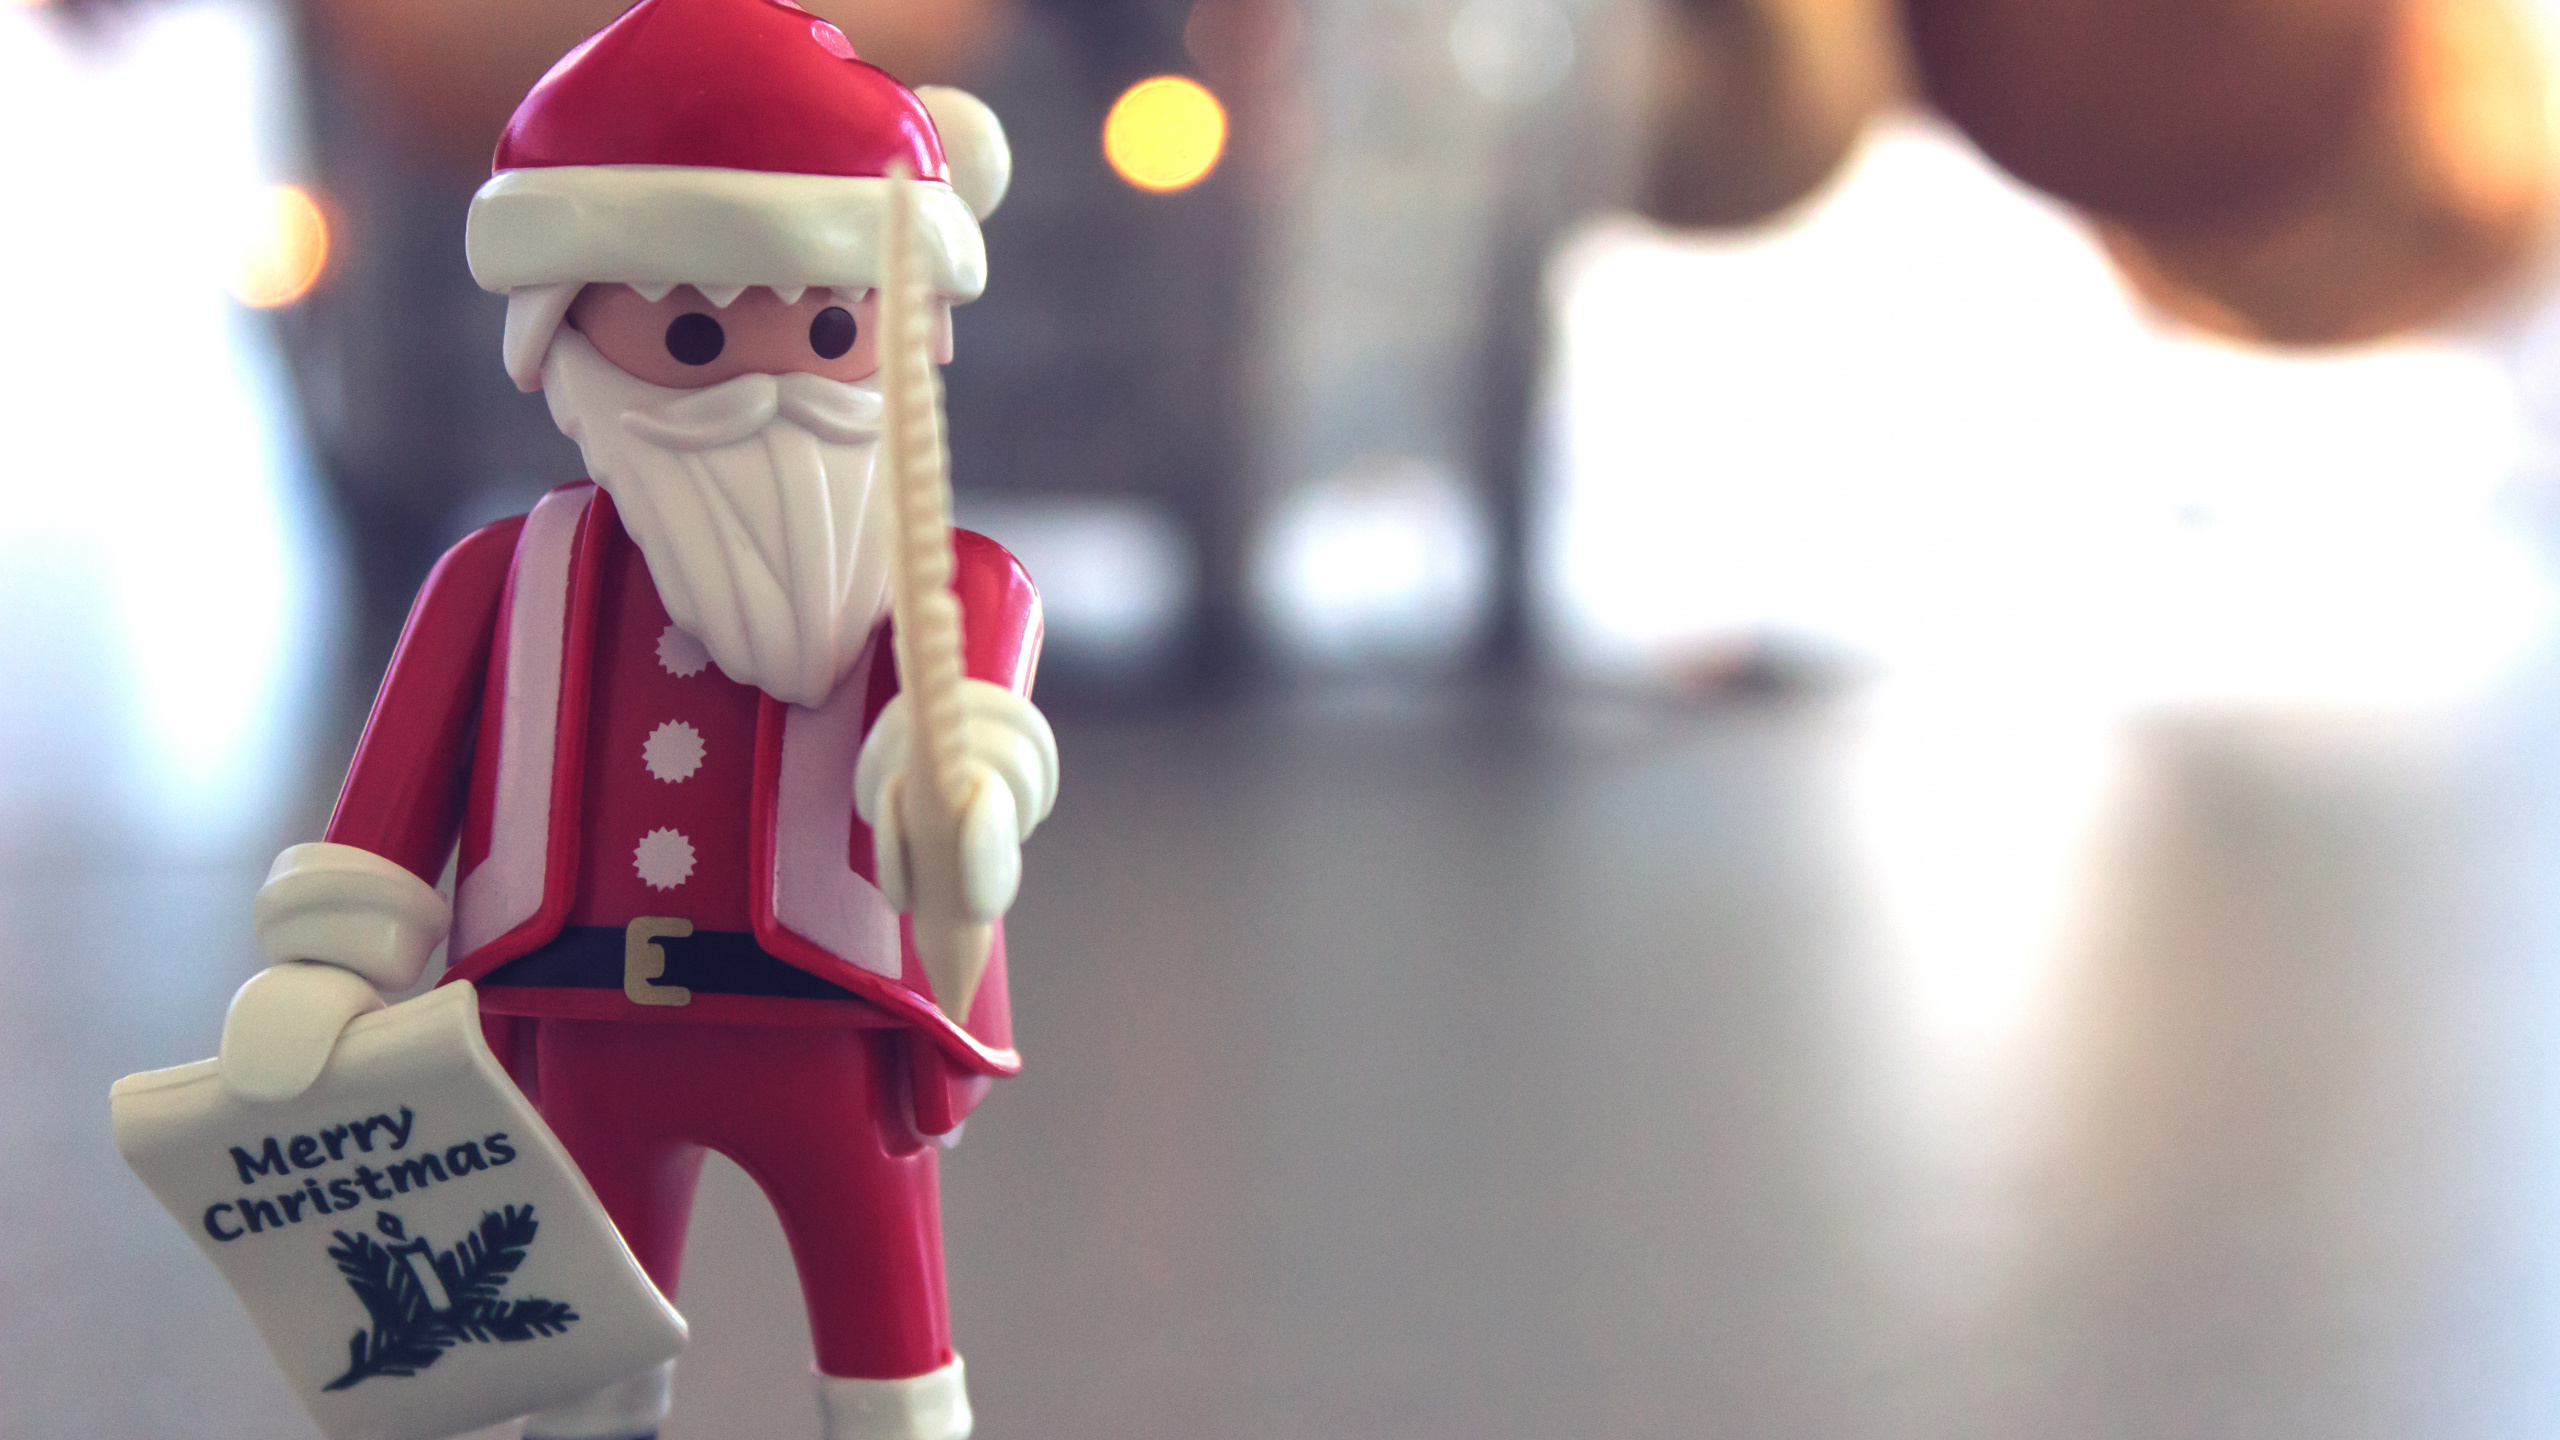 Santa Claus, Christmas Day, Figurine, Toy, Christmas. Wallpaper in 2560x1440 Resolution